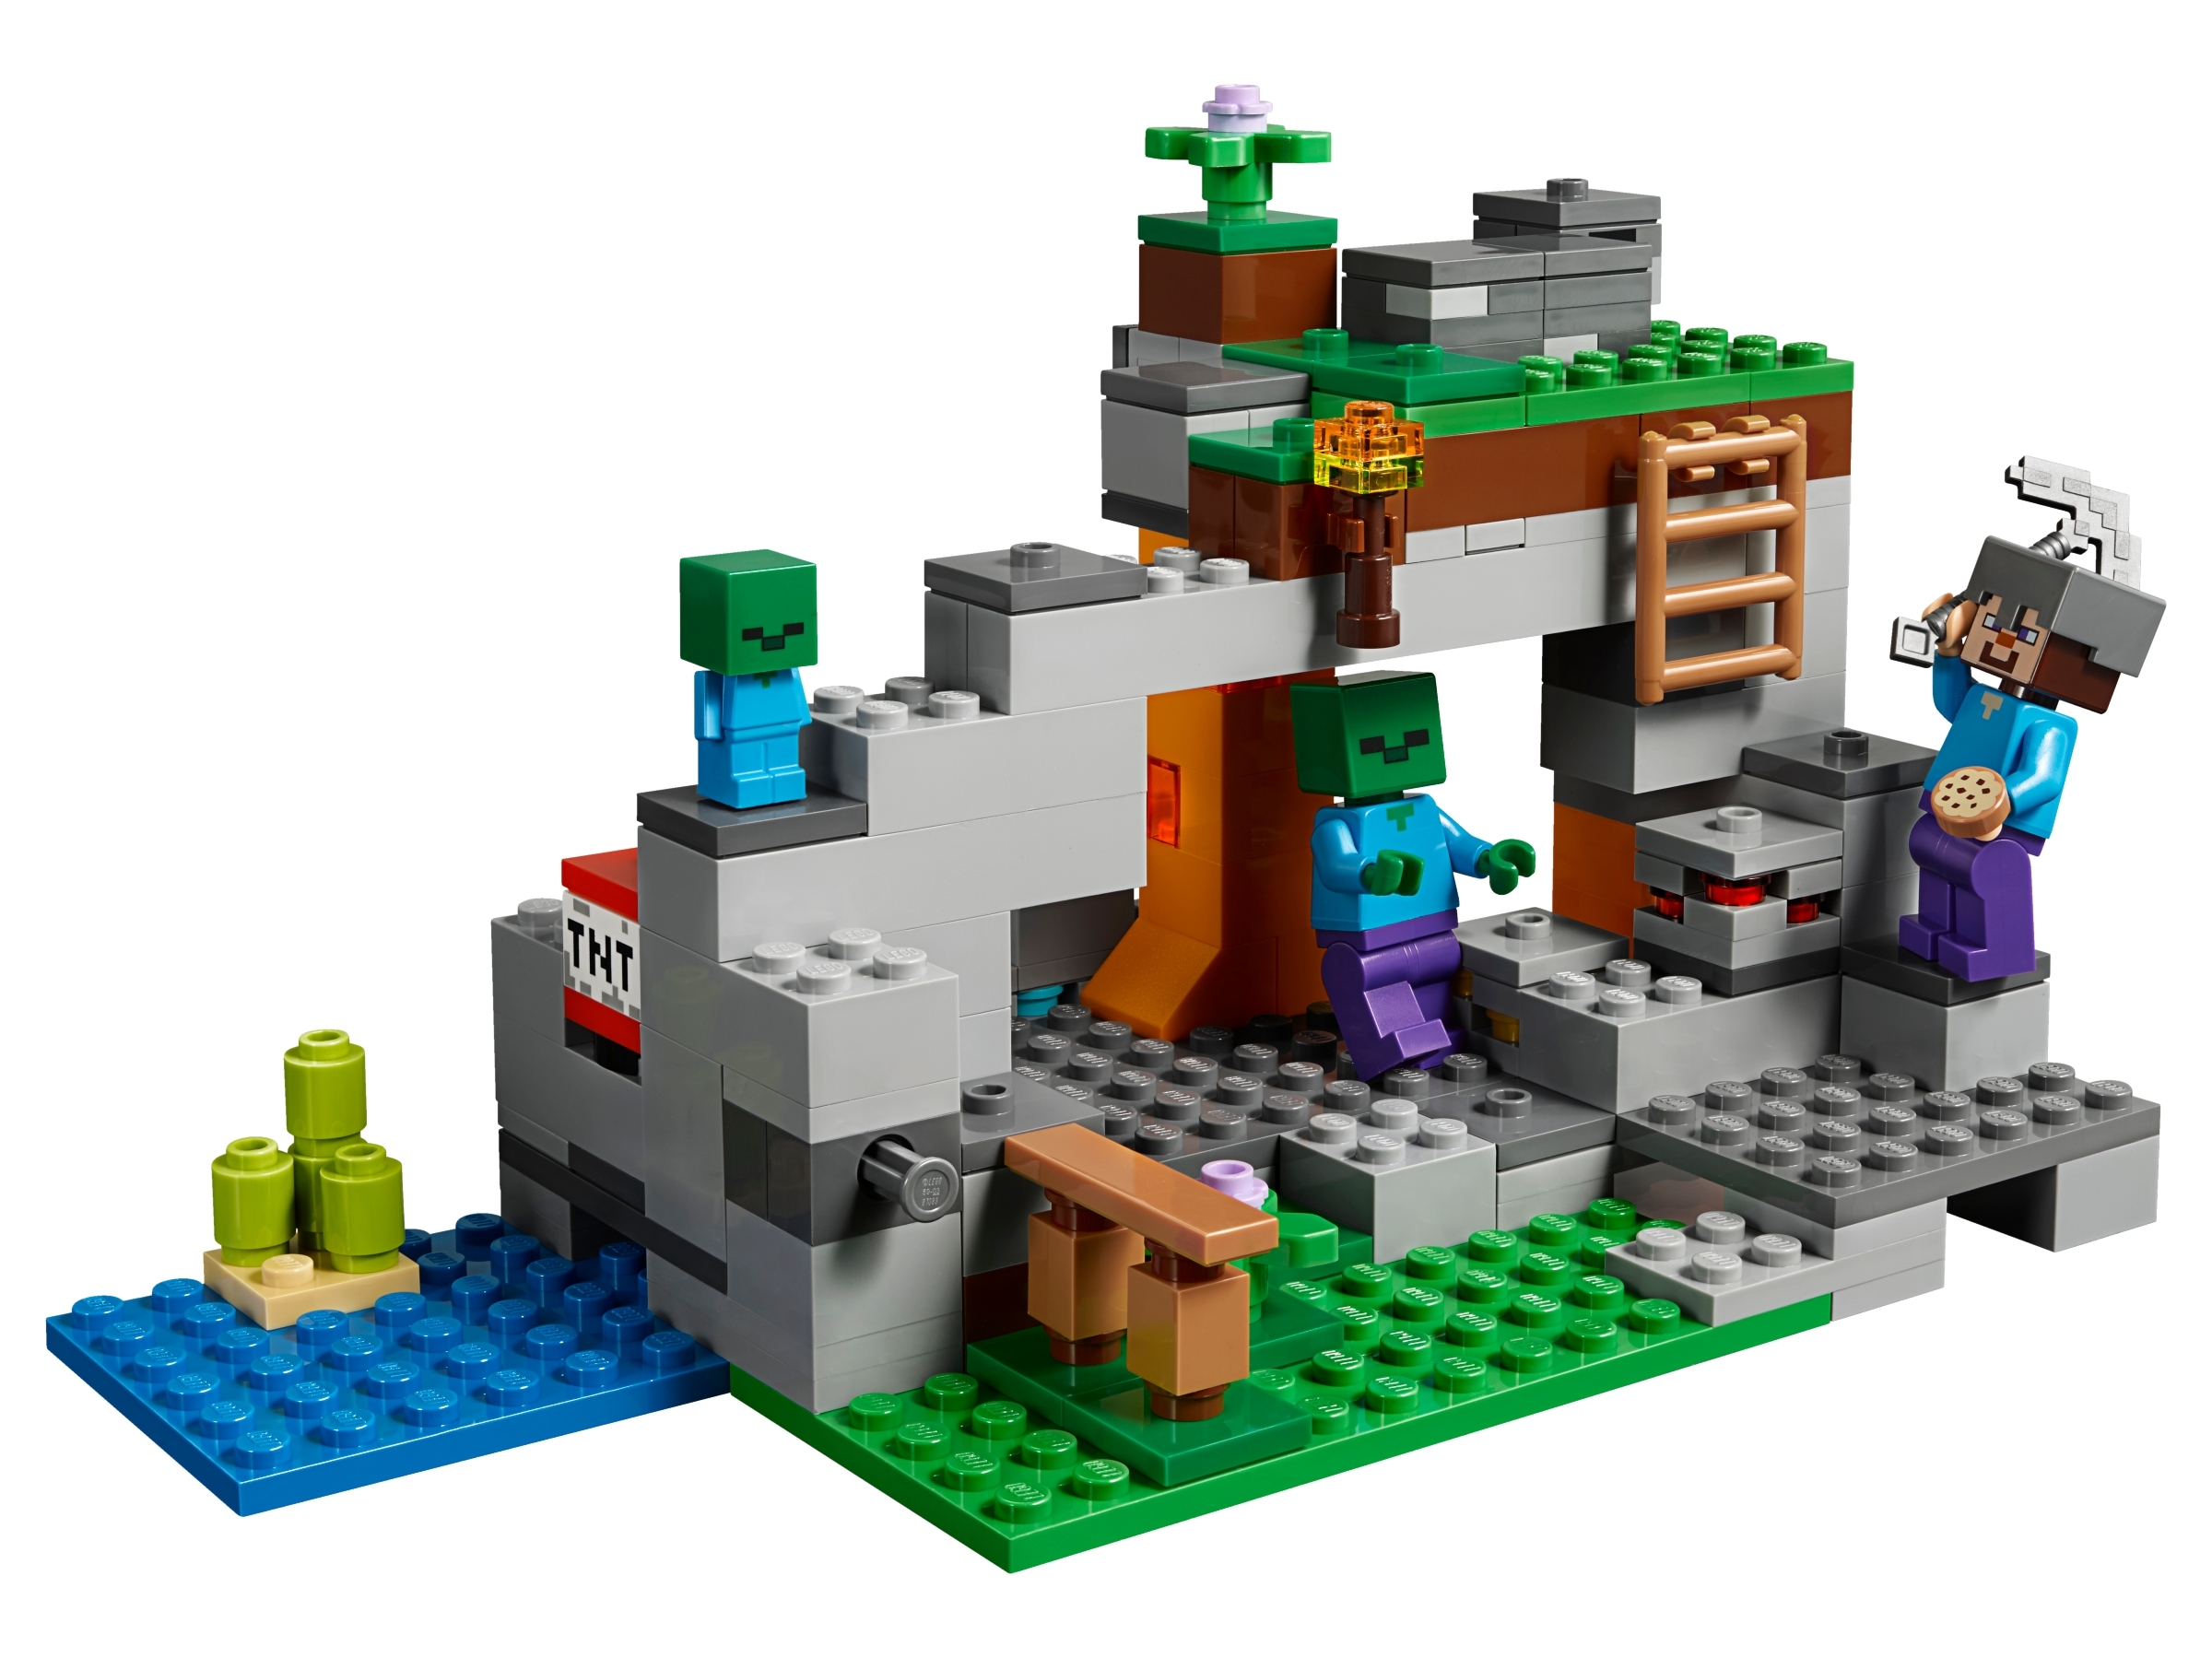 Lego Minecraft The Zombie Cave for sale online 21141 